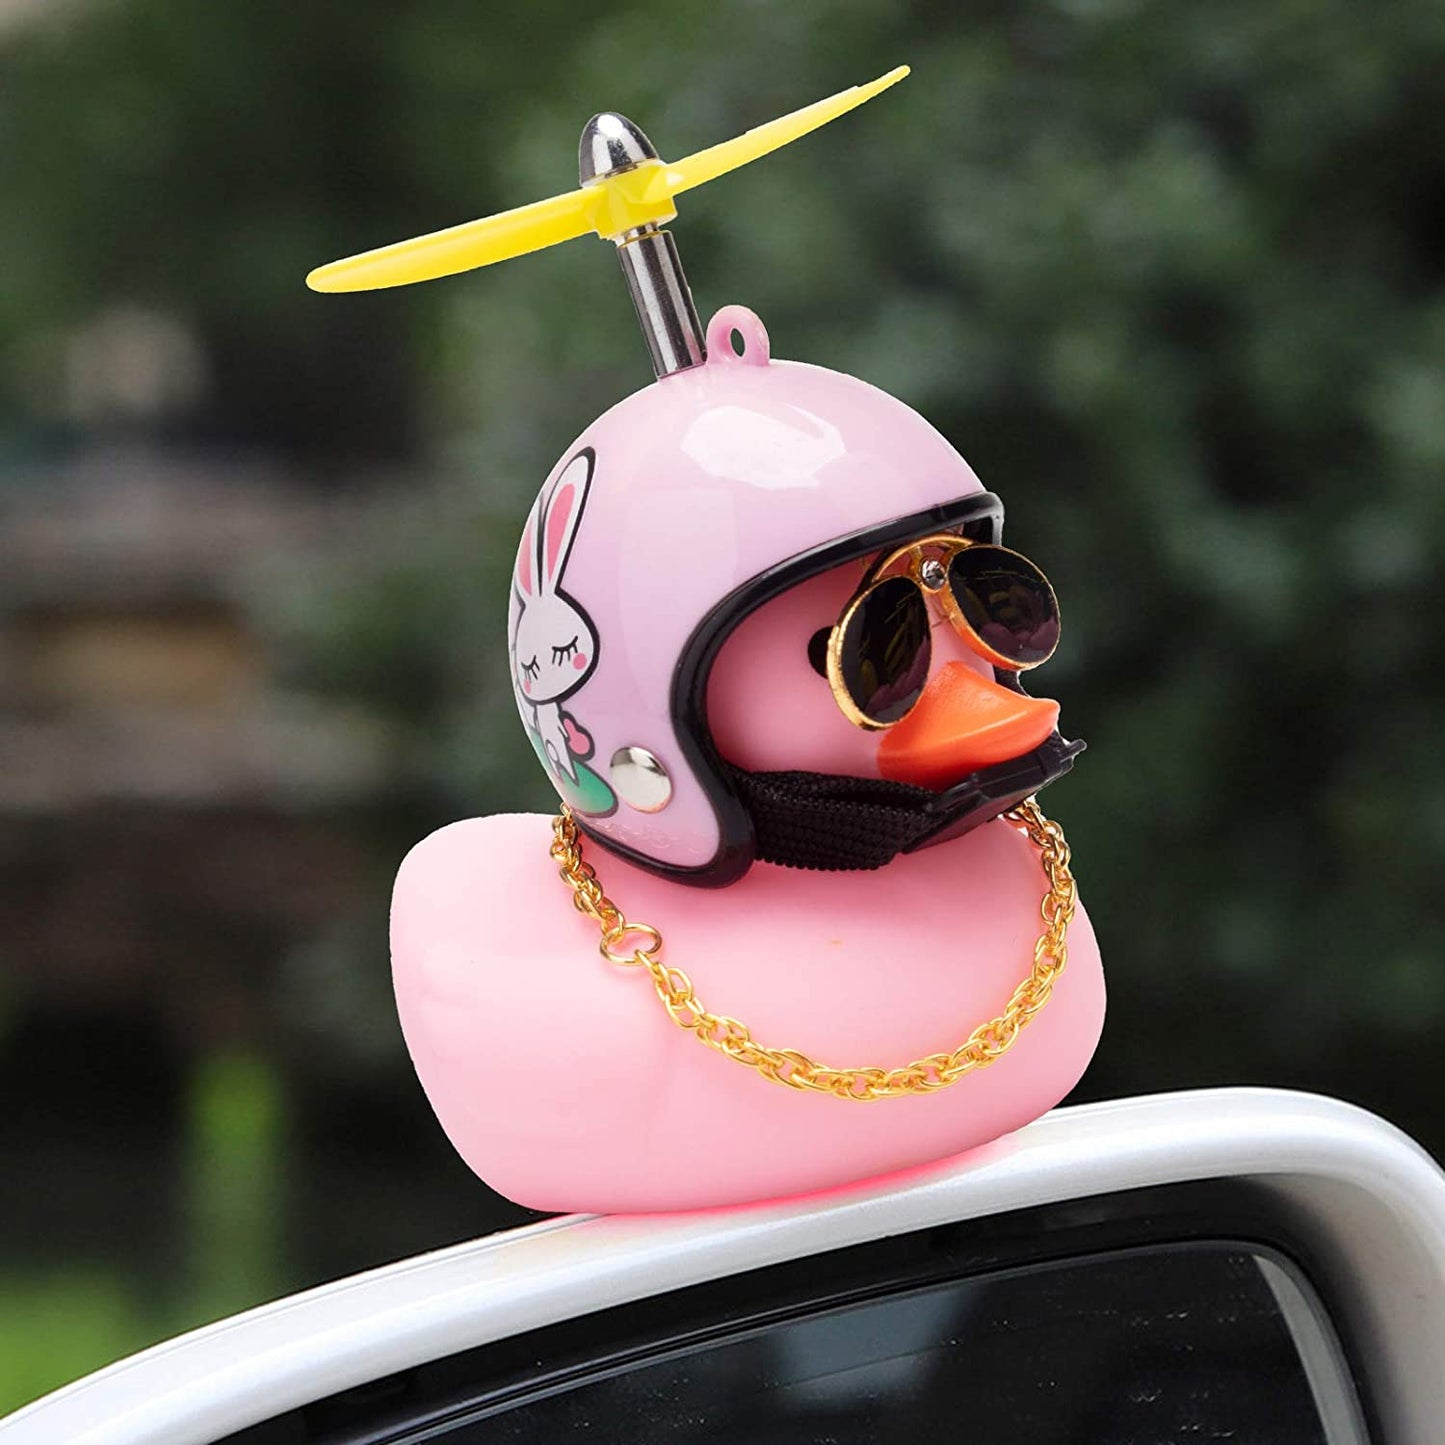 Car Duck, Rubber Duck Car Decorations, Dashboard 2Pack Small Duck Ornaments with Propellers Glasses Gold Chain (T-Rabbit&Shark-Pink)